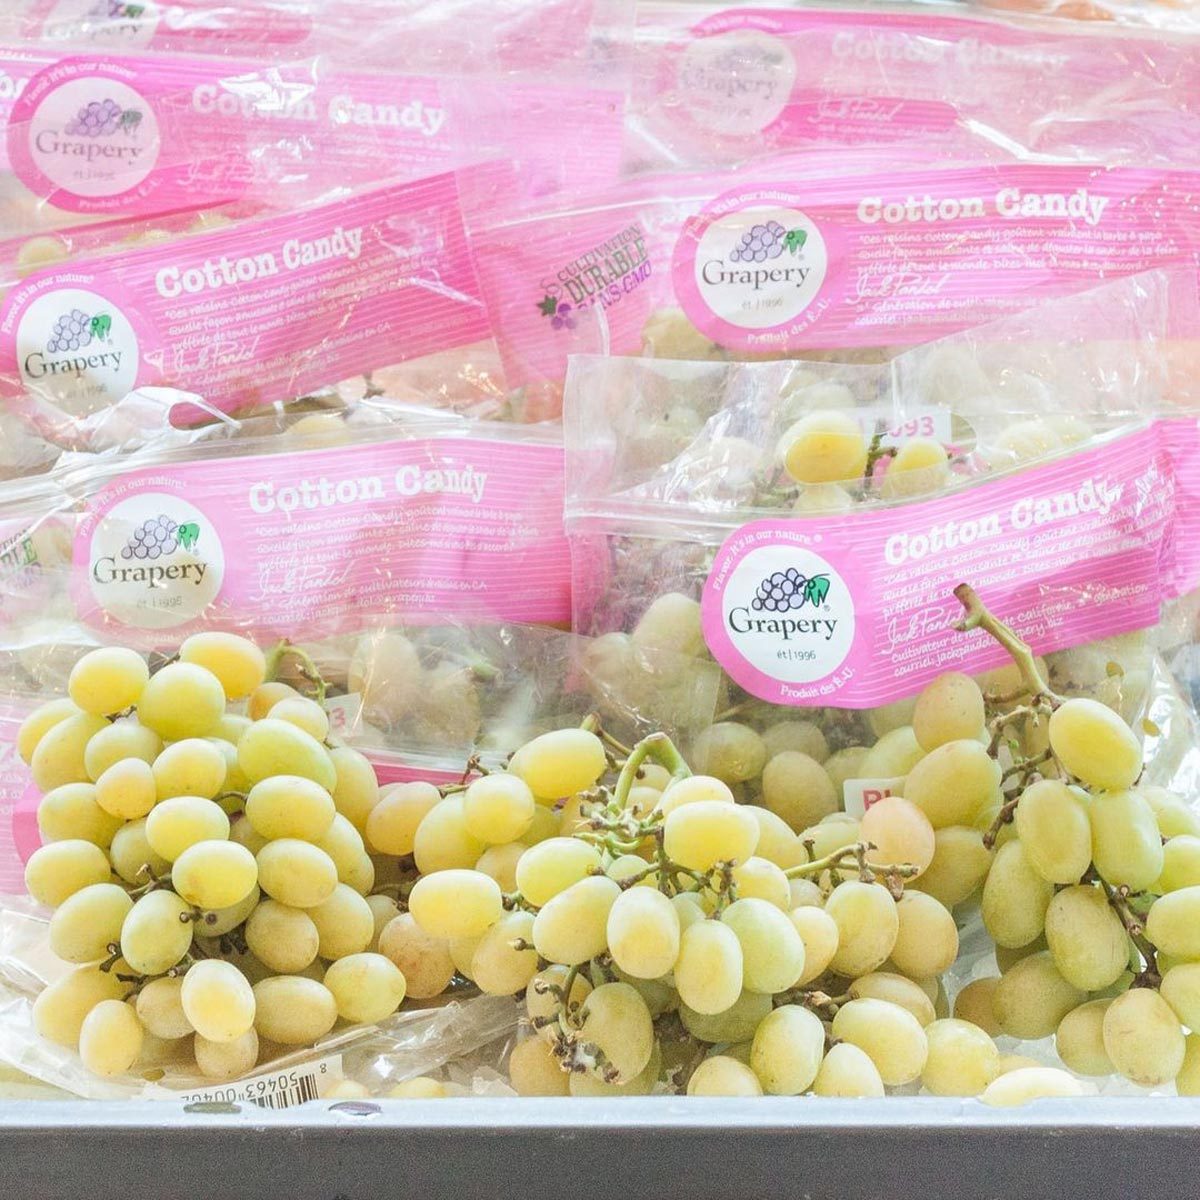 What Are Cotton Candy Grapes (and Where Do I Buy Them)?